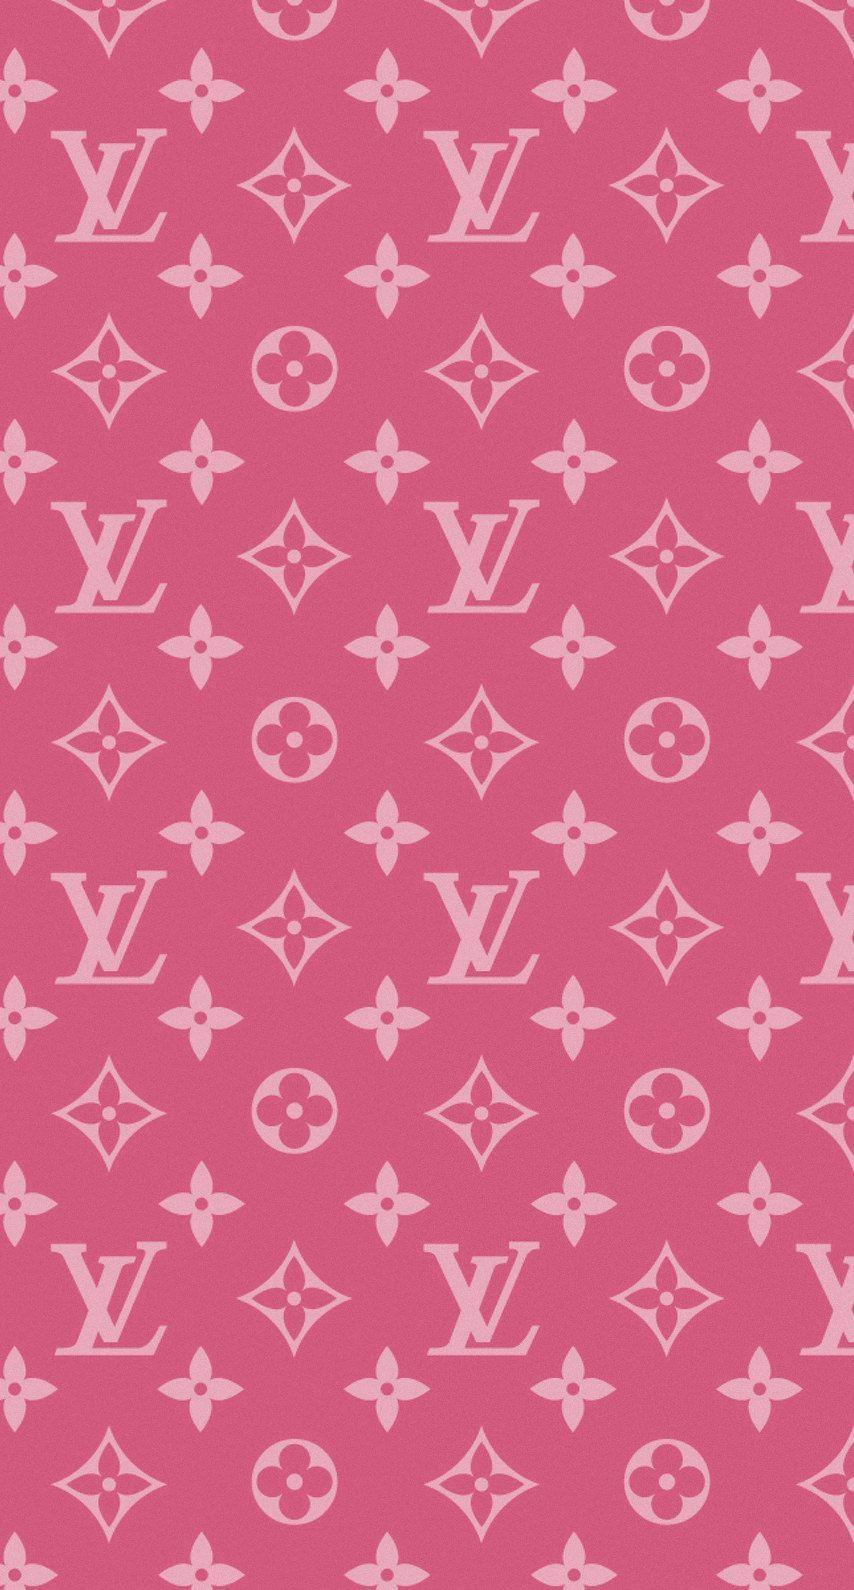 Supreme Louis Vuitton Wallpaper For Iphone The Art Of Mike Mignola